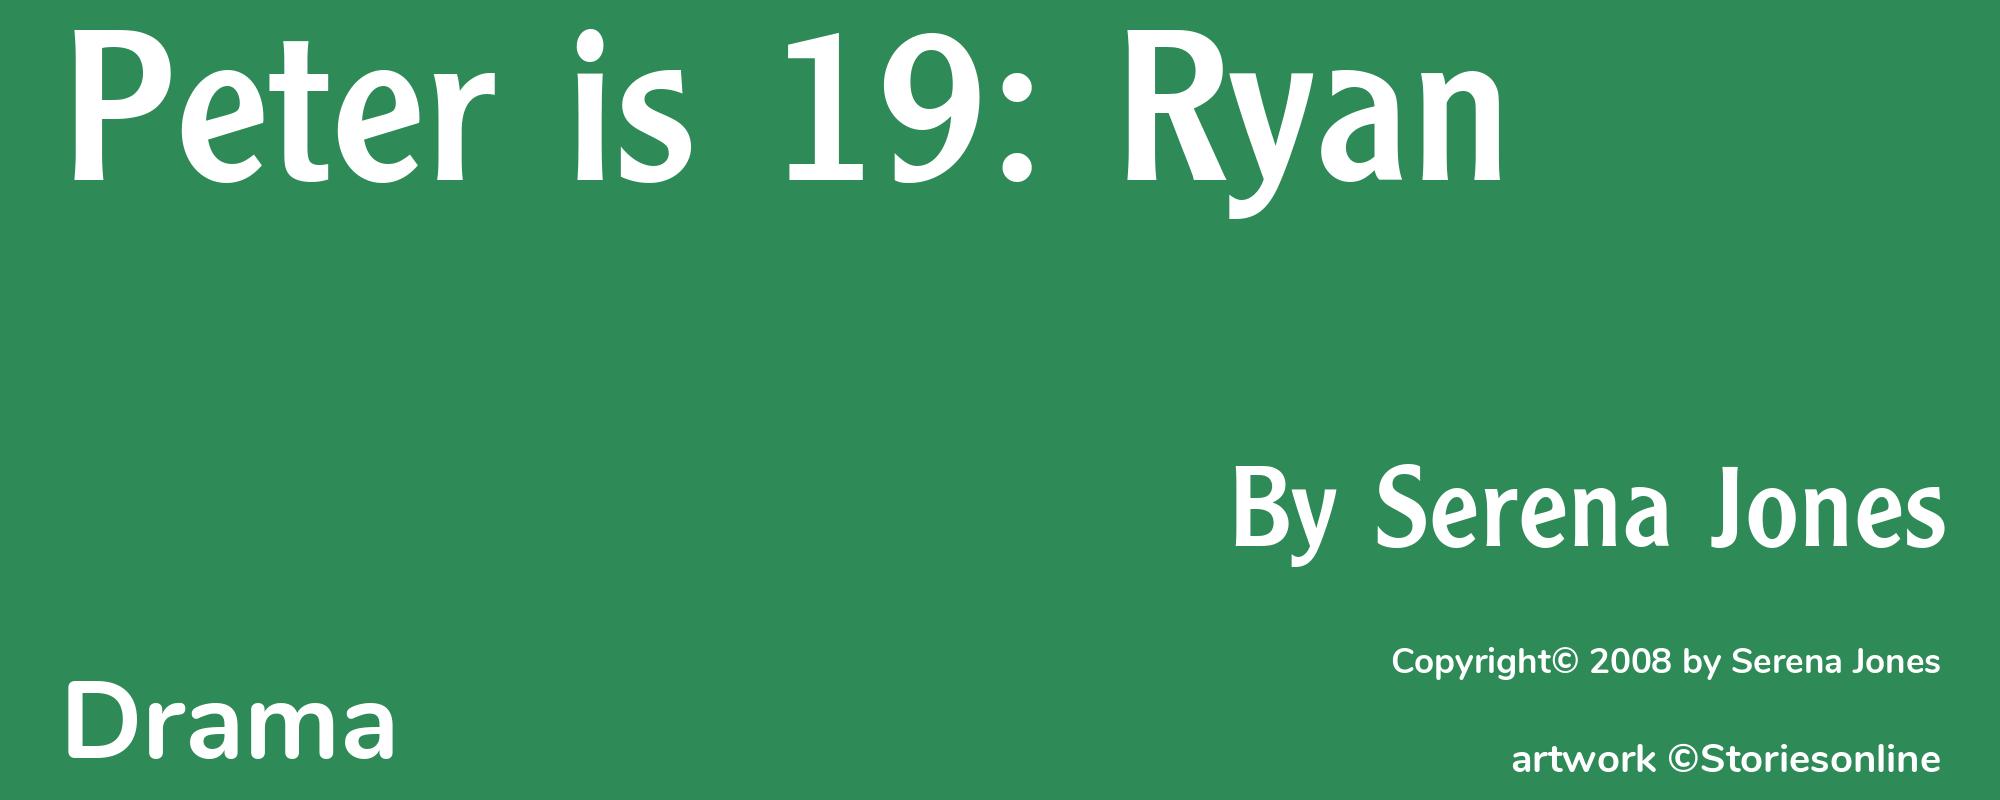 Peter is 19: Ryan - Cover